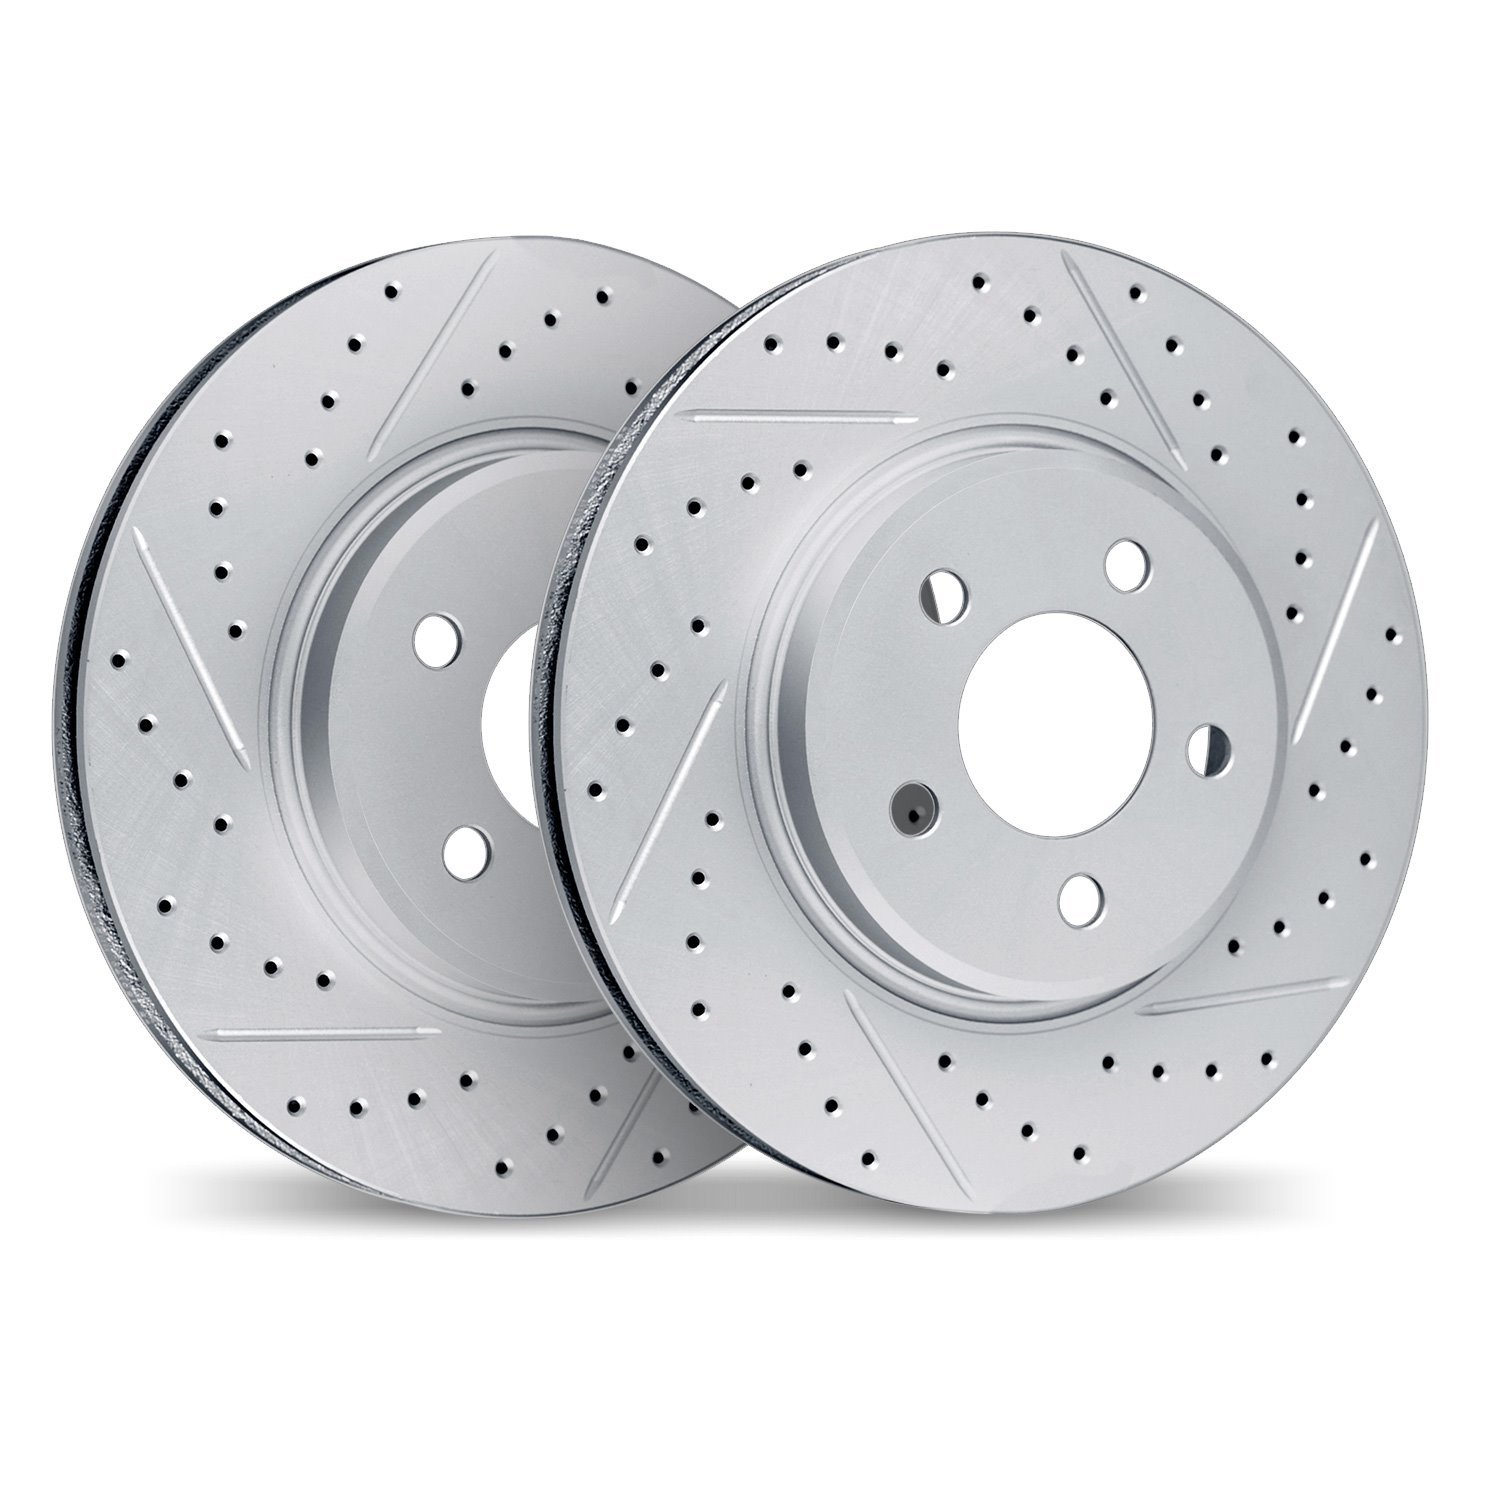 2002-47015 Geoperformance Drilled/Slotted Brake Rotors, 1997-2005 GM, Position: Front